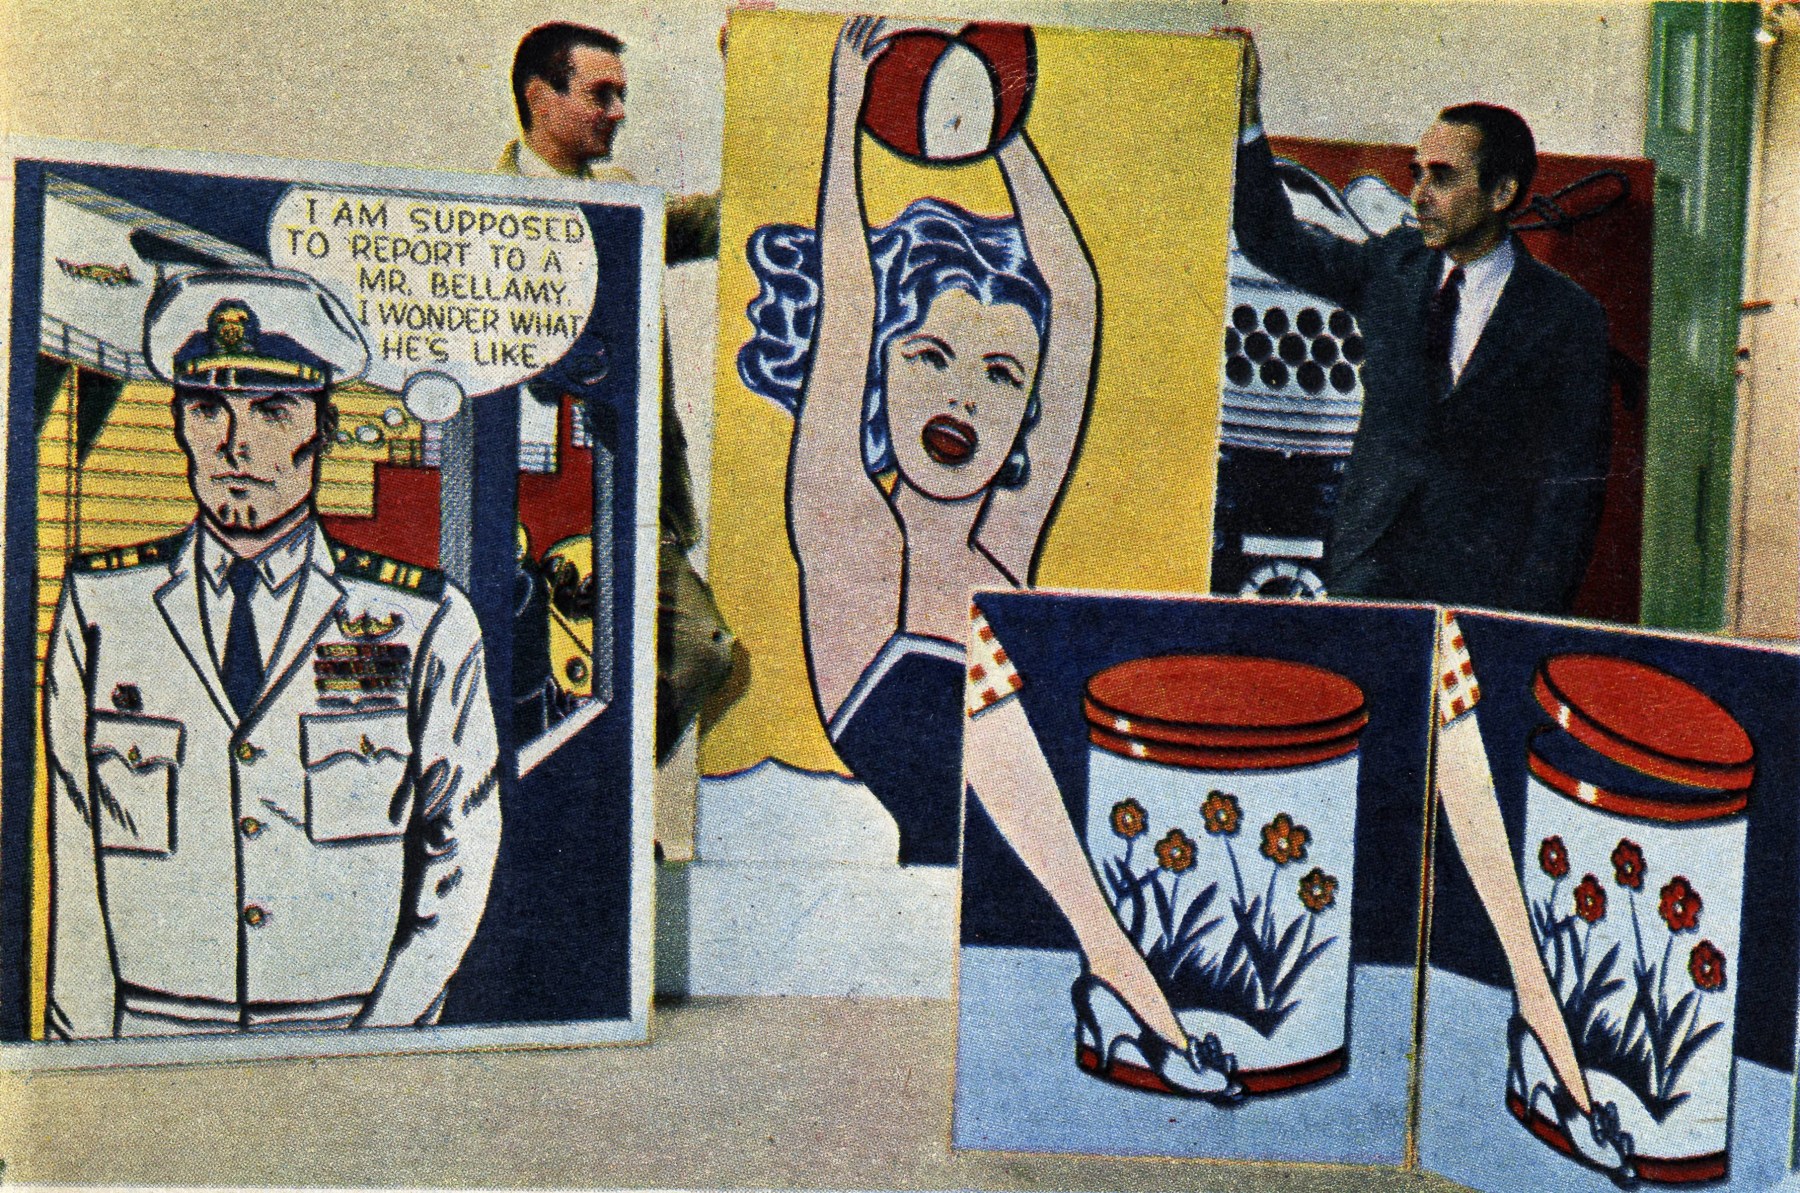 Roy Lichtenstein and Leo Castelli in 1961. Mr. Bellamy, 1961, Girl with Ball, 1961, Step-on Can with Leg, 1961, and Roto Broil, 1961 at the Castelli Gallery in New York, featured in the St. Louis Post-Dispatch: Sunday Pictures. Artwork &amp;copy; Estate of Roy Lichtenstein.